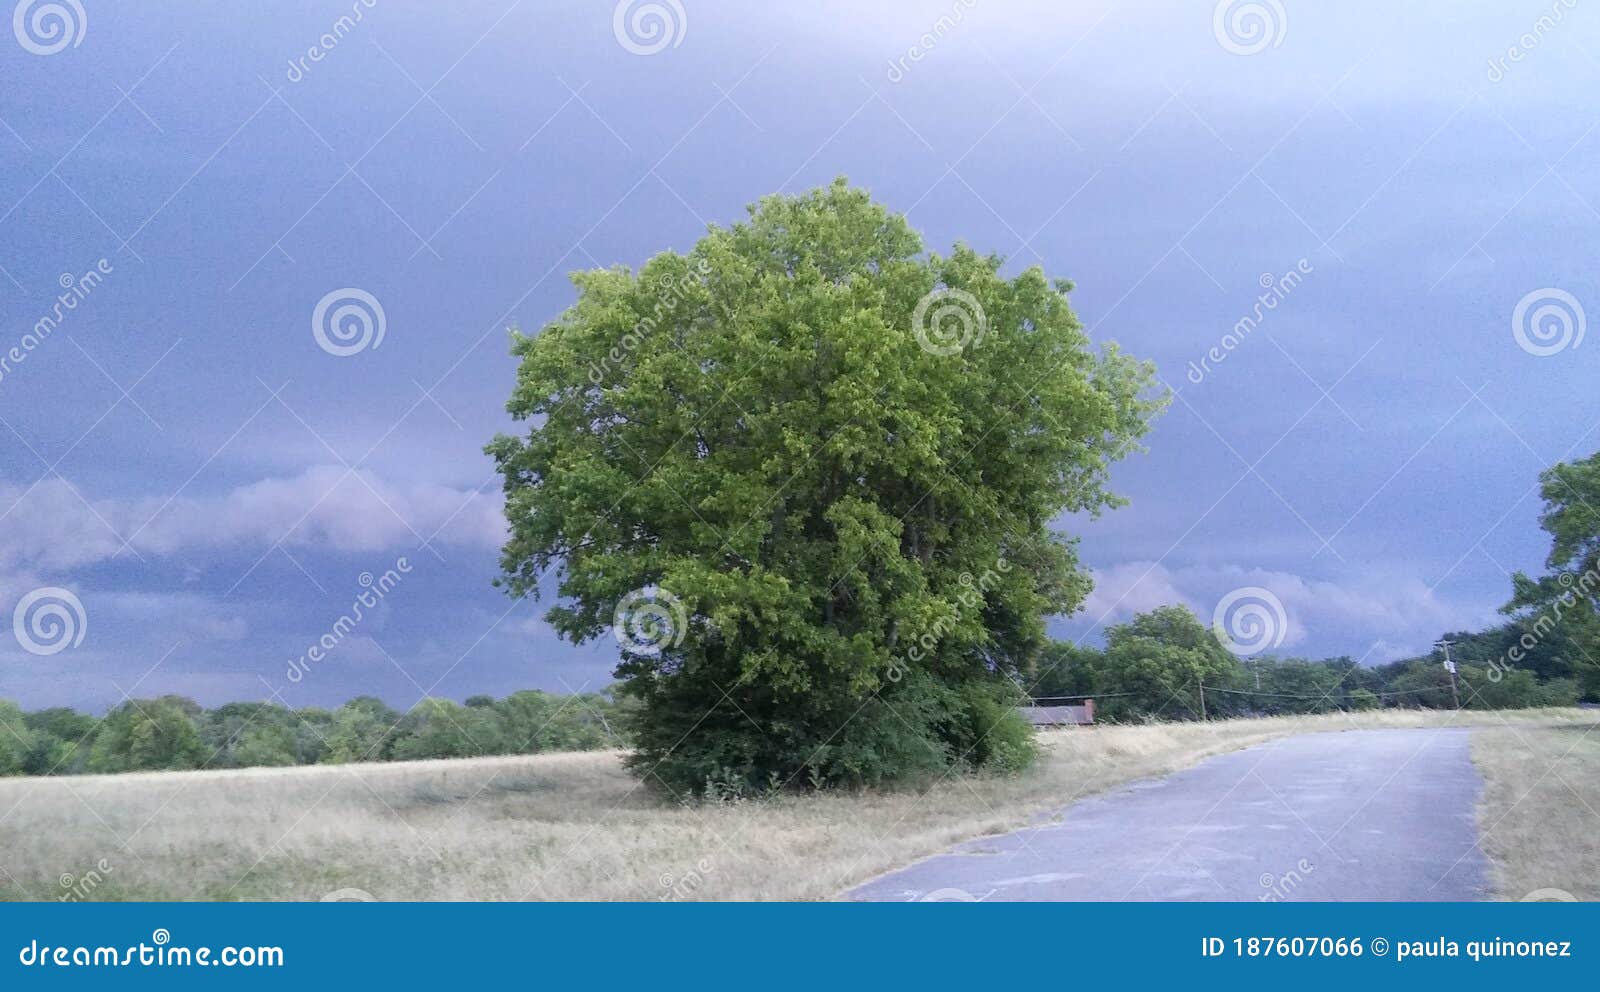 a green tree in the middle of the praire